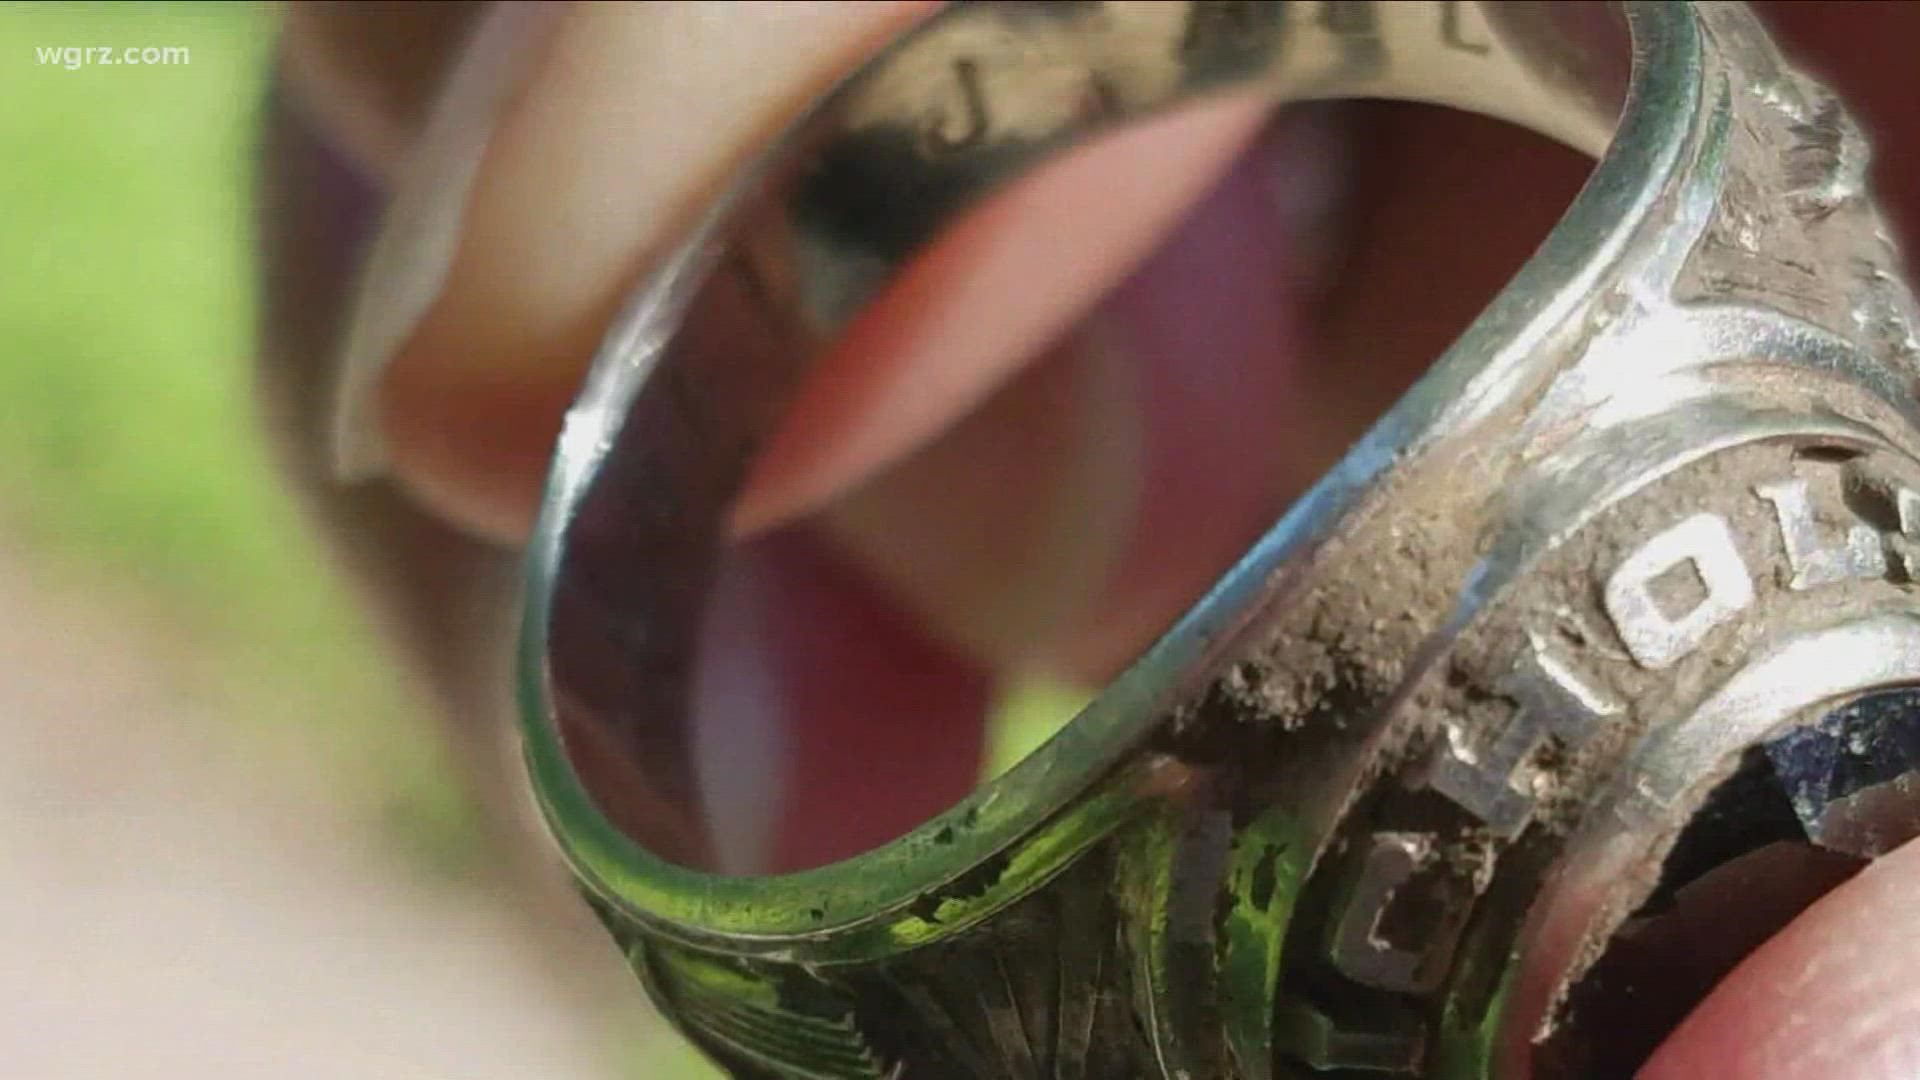 Class ring reunited with owner 46 years later